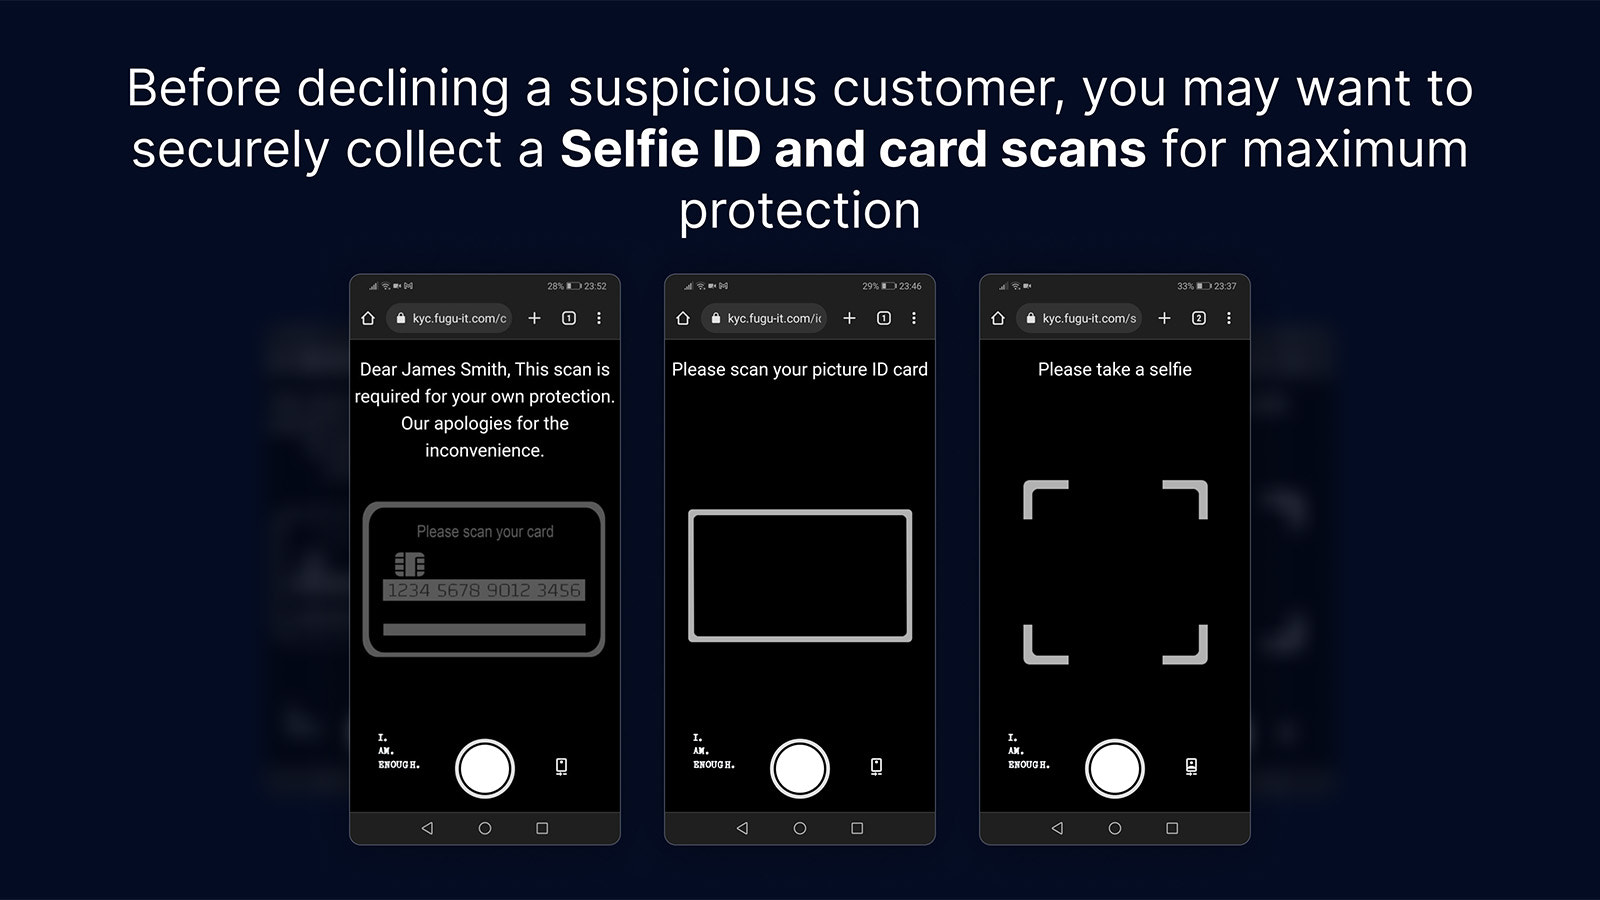 When required, securely collect Selfie ID's and card scans